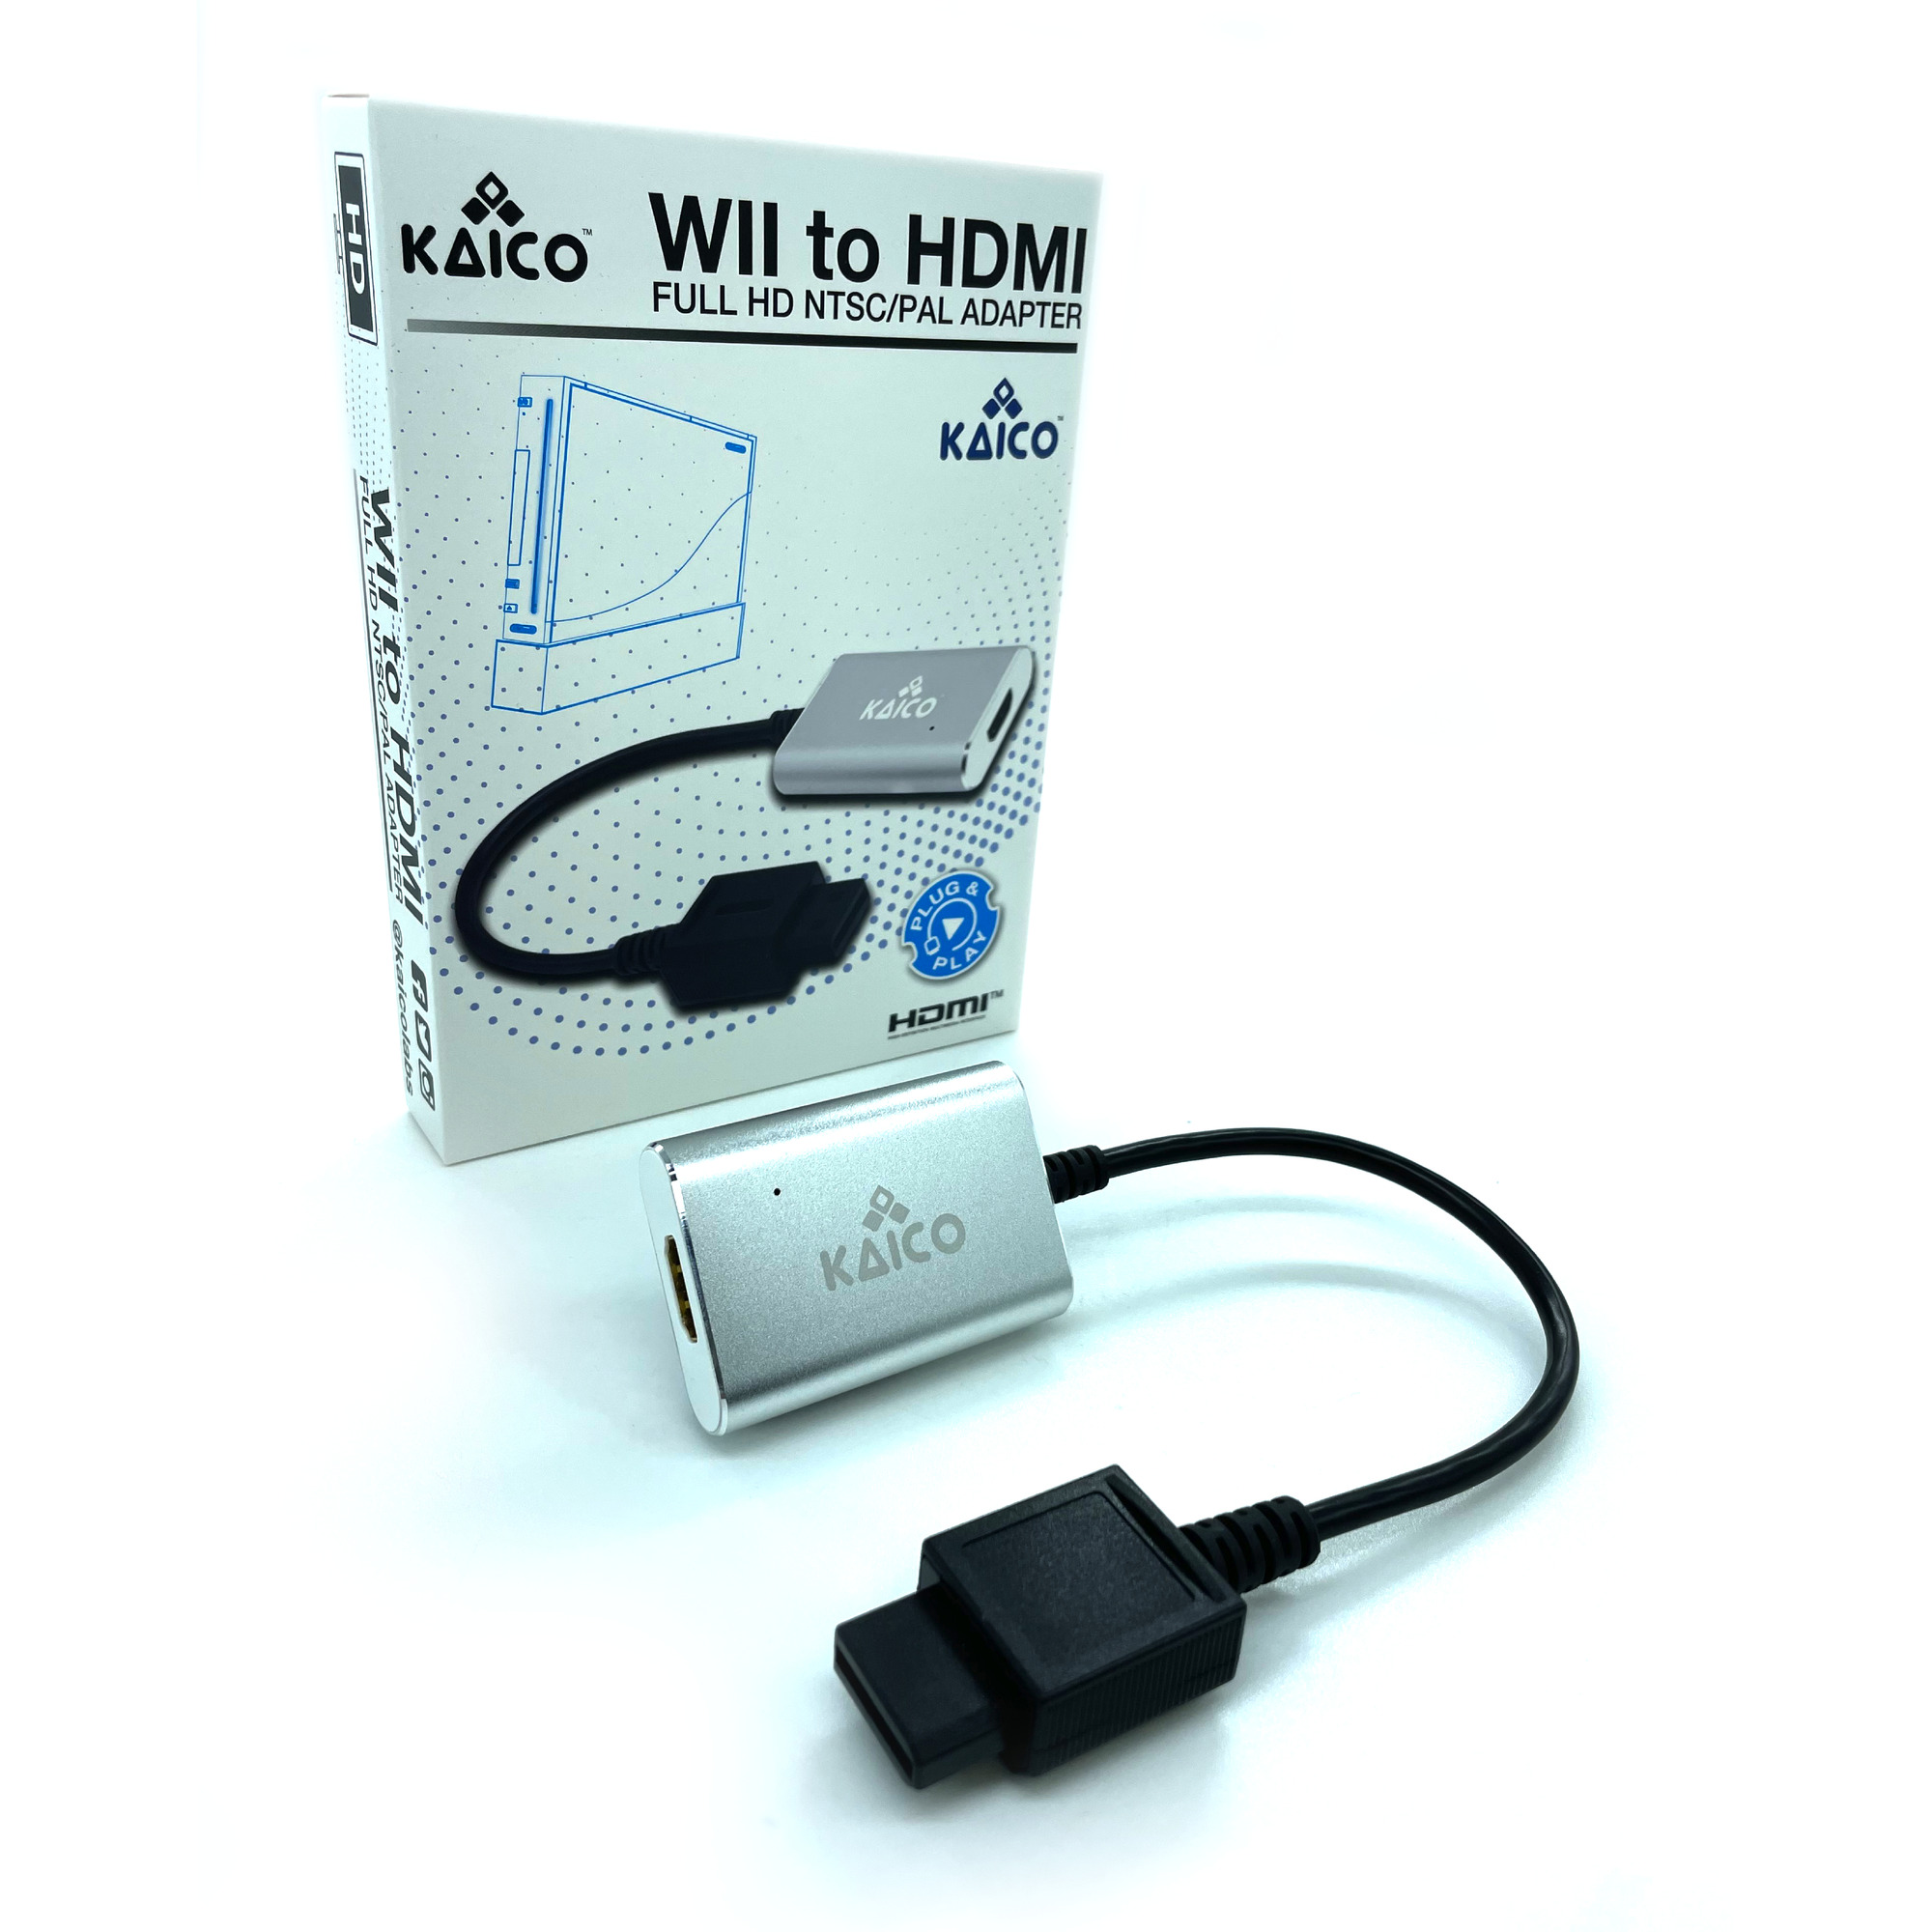 Opførsel Shetland Bevæger sig ikke Kaico Wii HDMI Adapter for use with Nintendo Wii Consoles - Supports  Component Output - A Simple Plug & Play by Kaico for Nintendo Wii consoles -